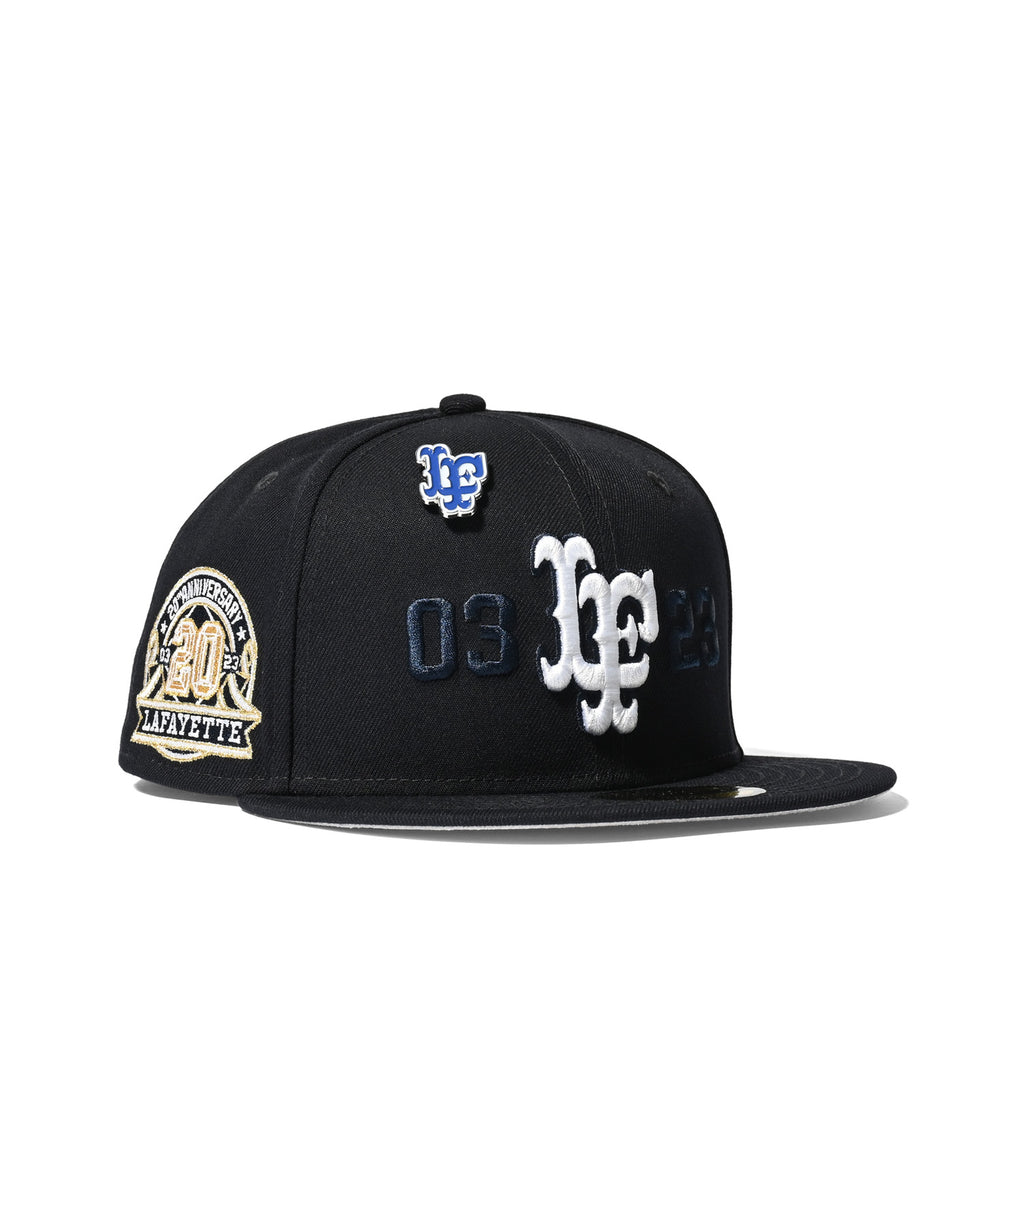 Online shopping for LFYT × NEW ERA collaboration items